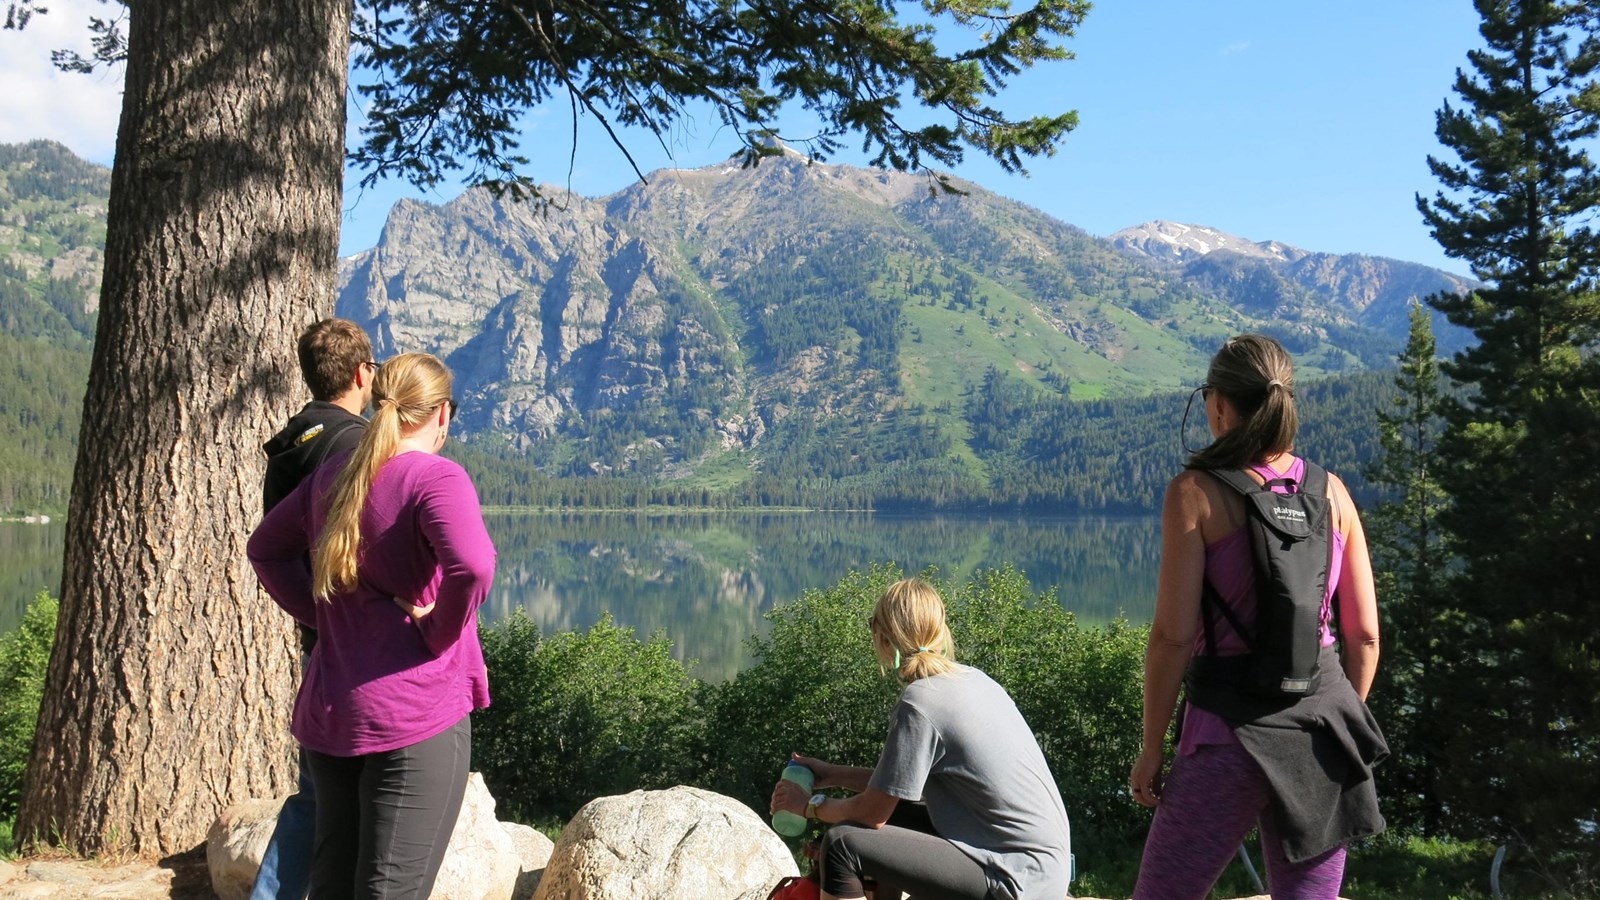 Hikers viewing a lake with mountains reflected into it.